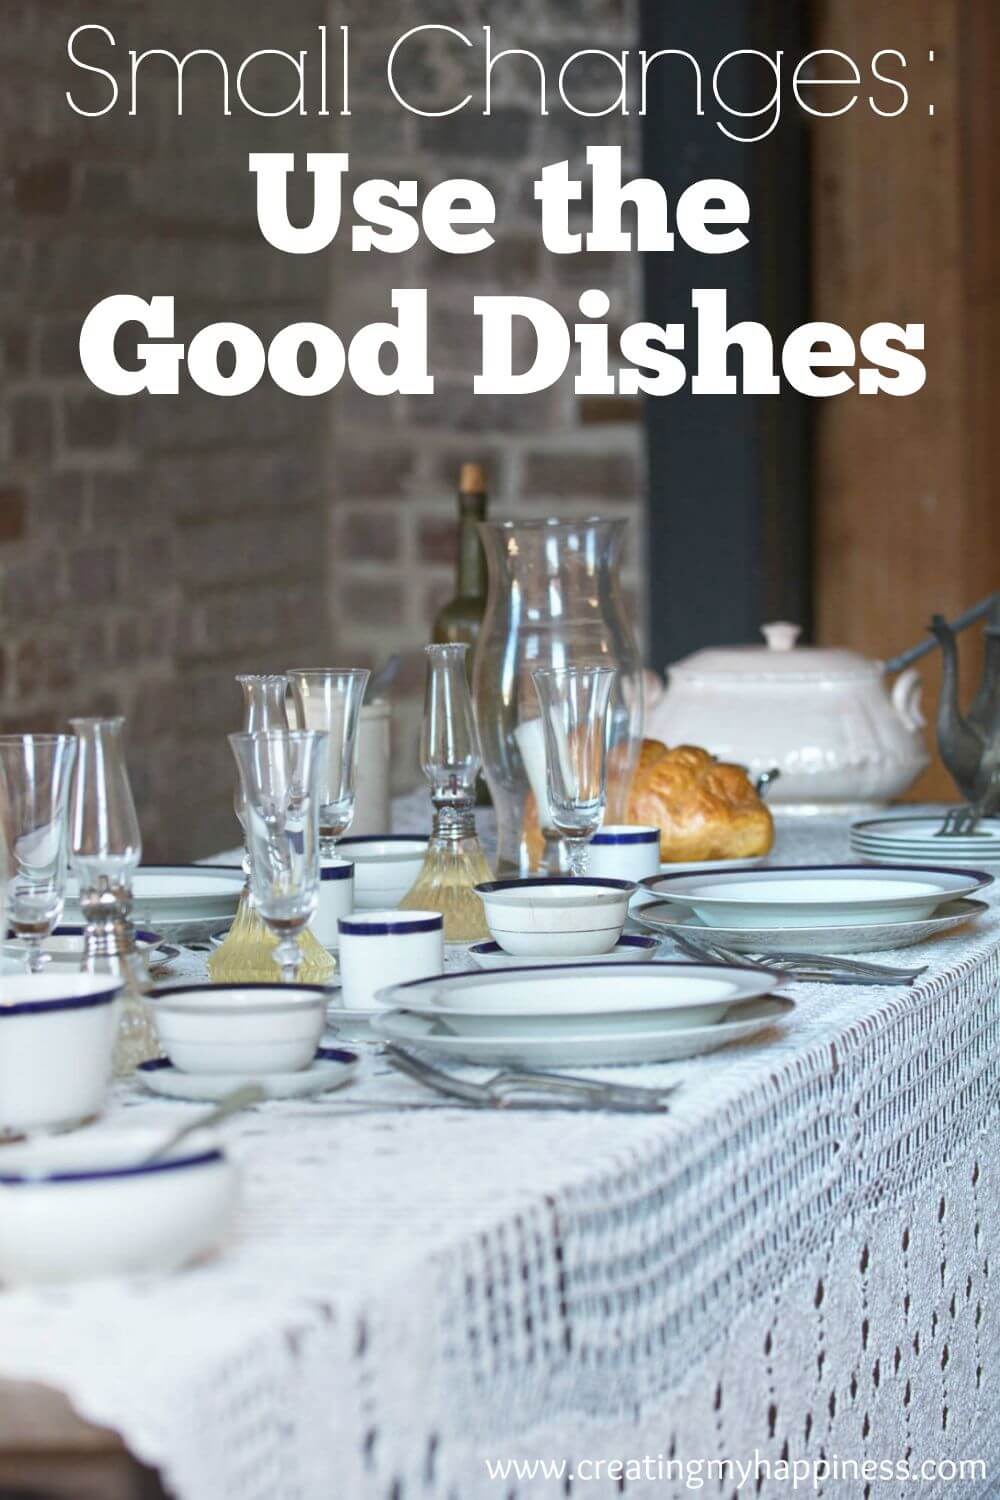 Do you have a cupboard full of dishes you never use because you're too scared to use them? Here's why I decided to go ahead and use the good dishes.